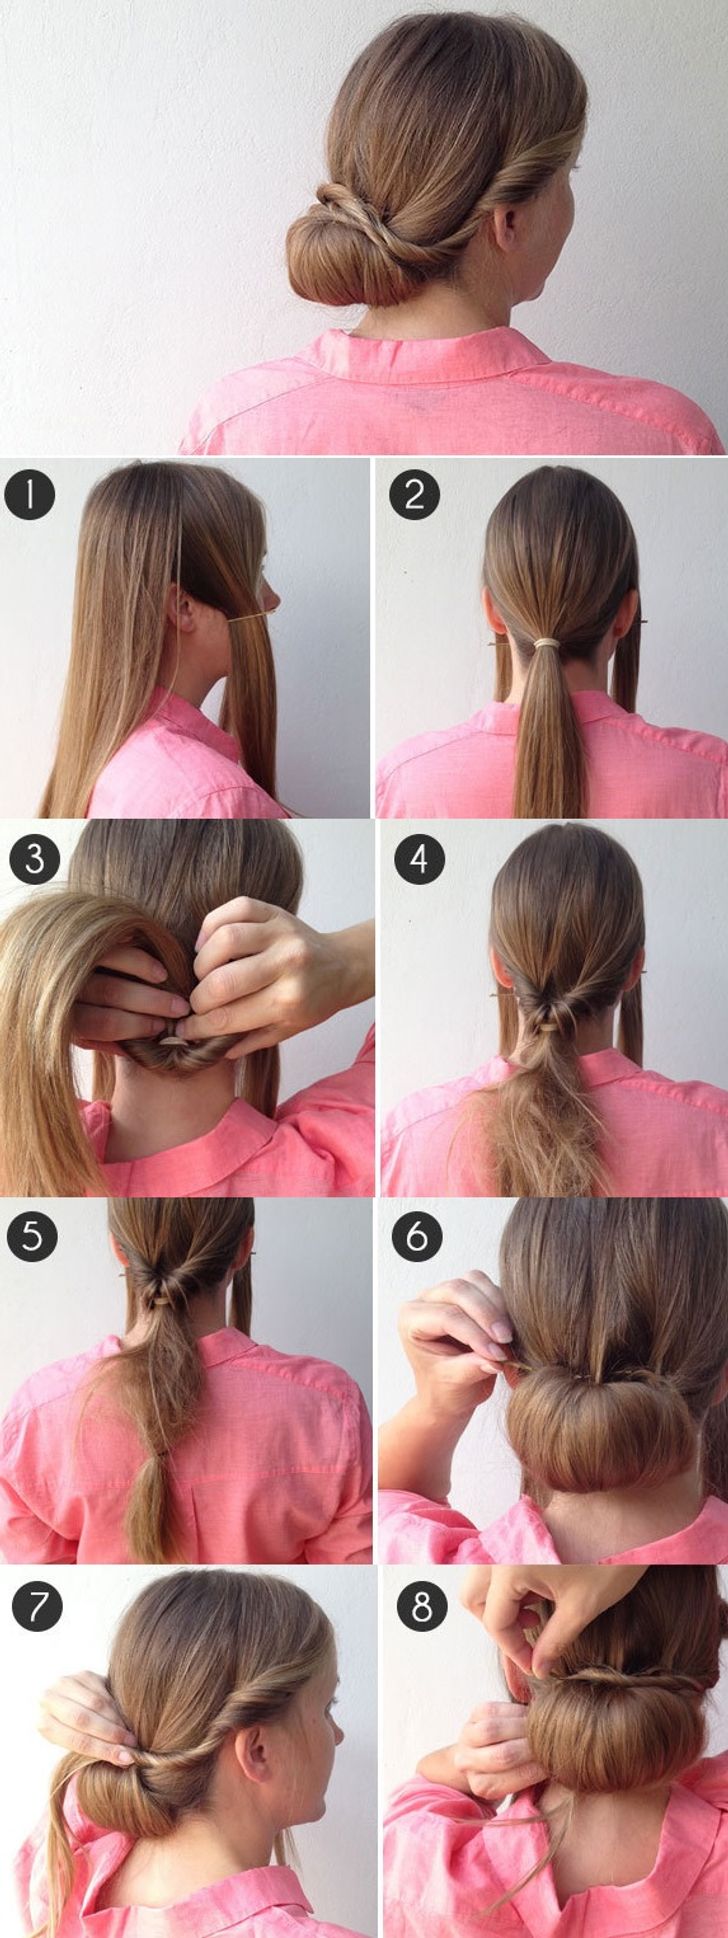 15 summer hairstyles you can create in 5 minutes